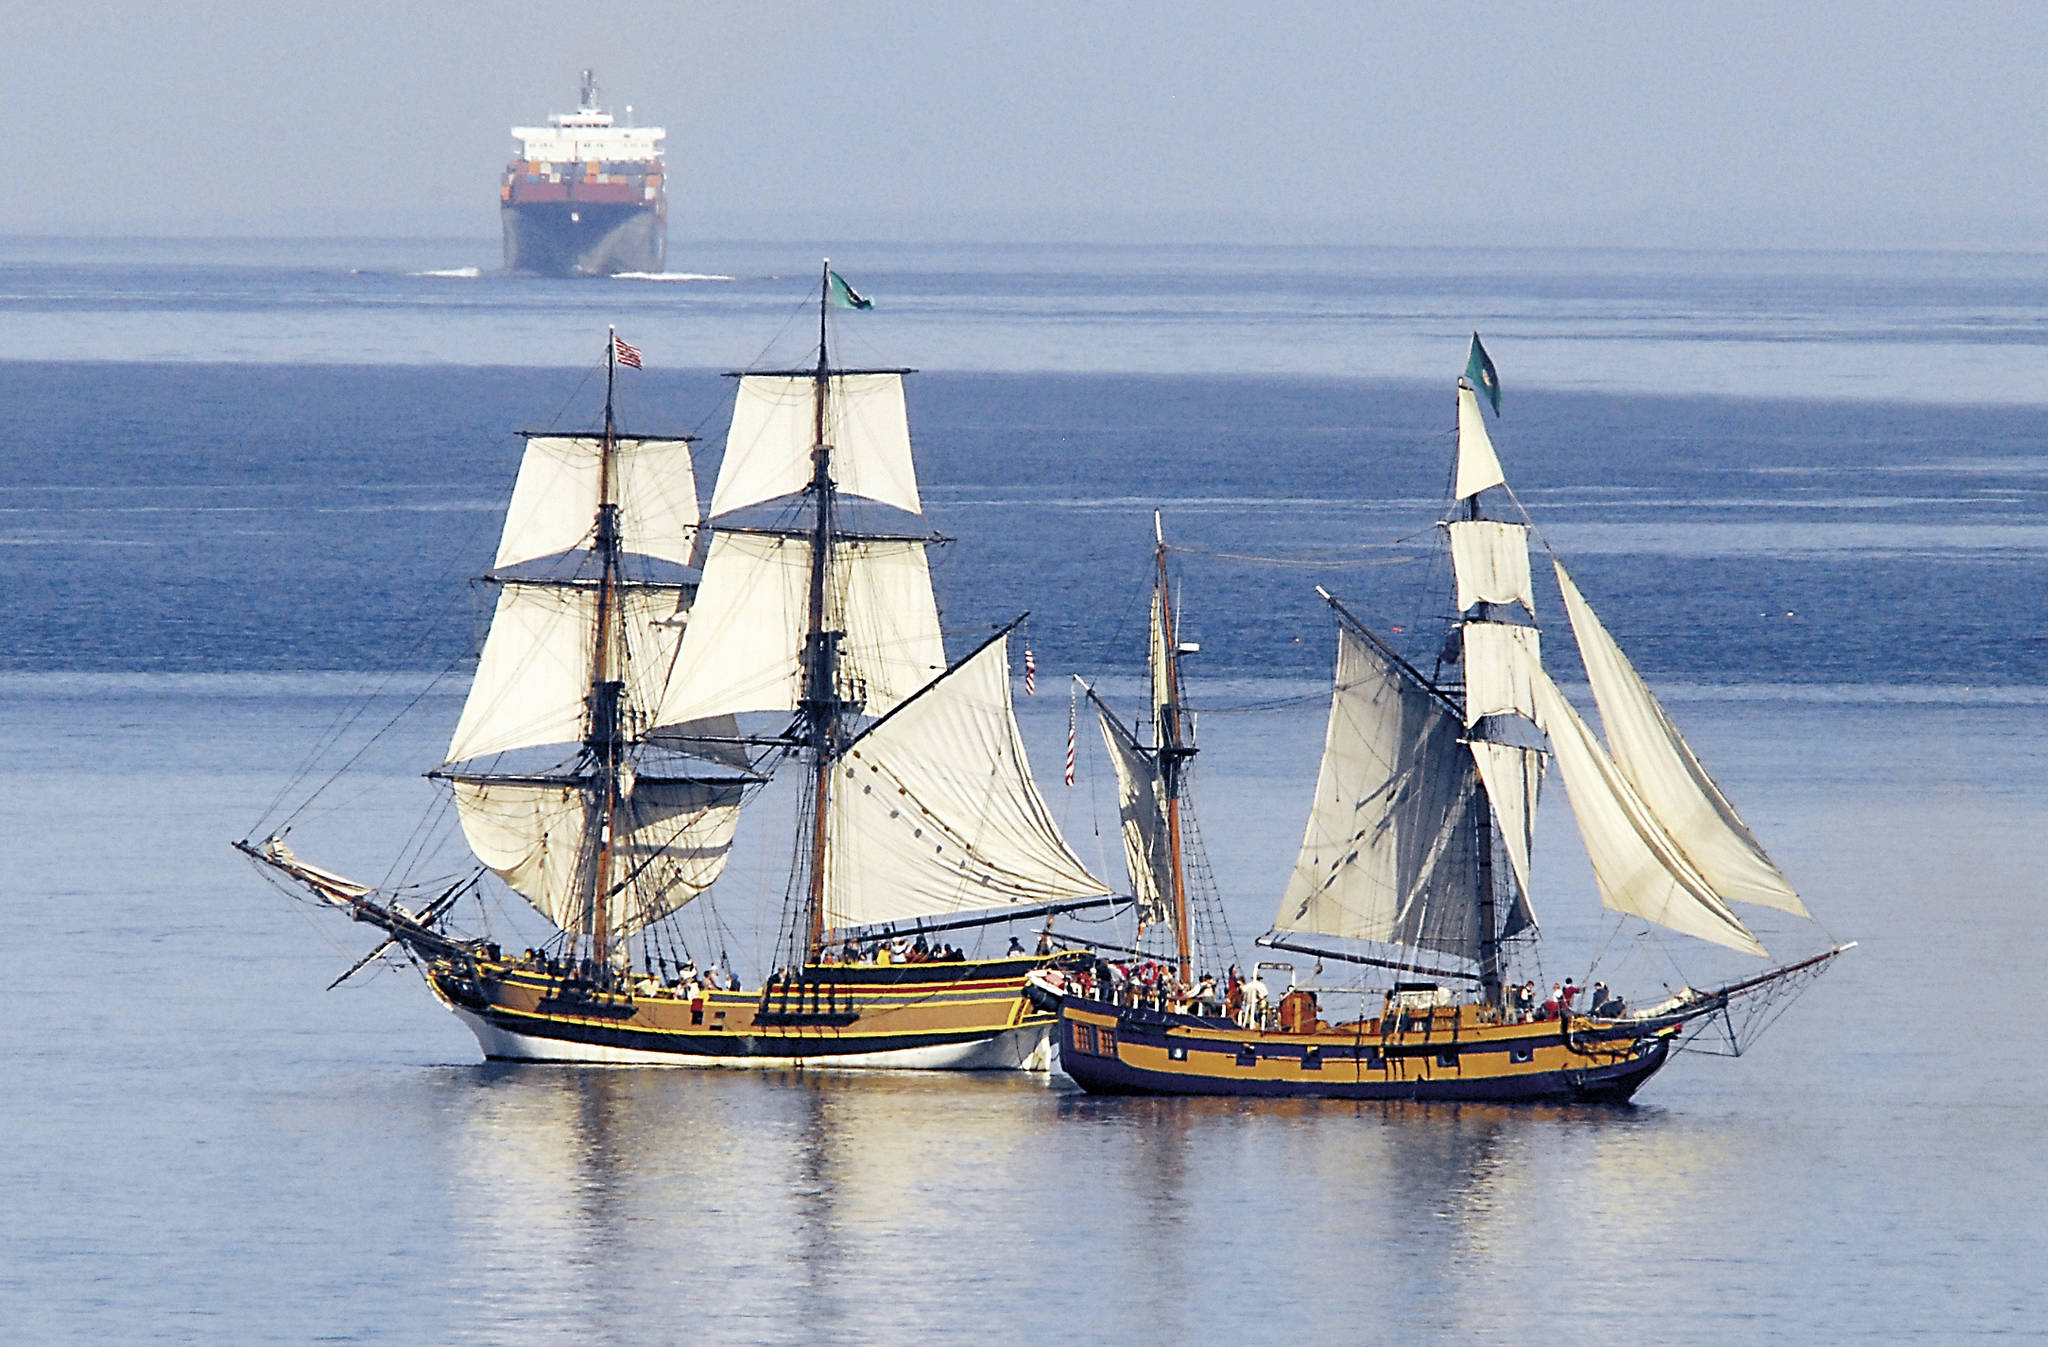 Tall ships visit Port Ludlow for sailings, tours